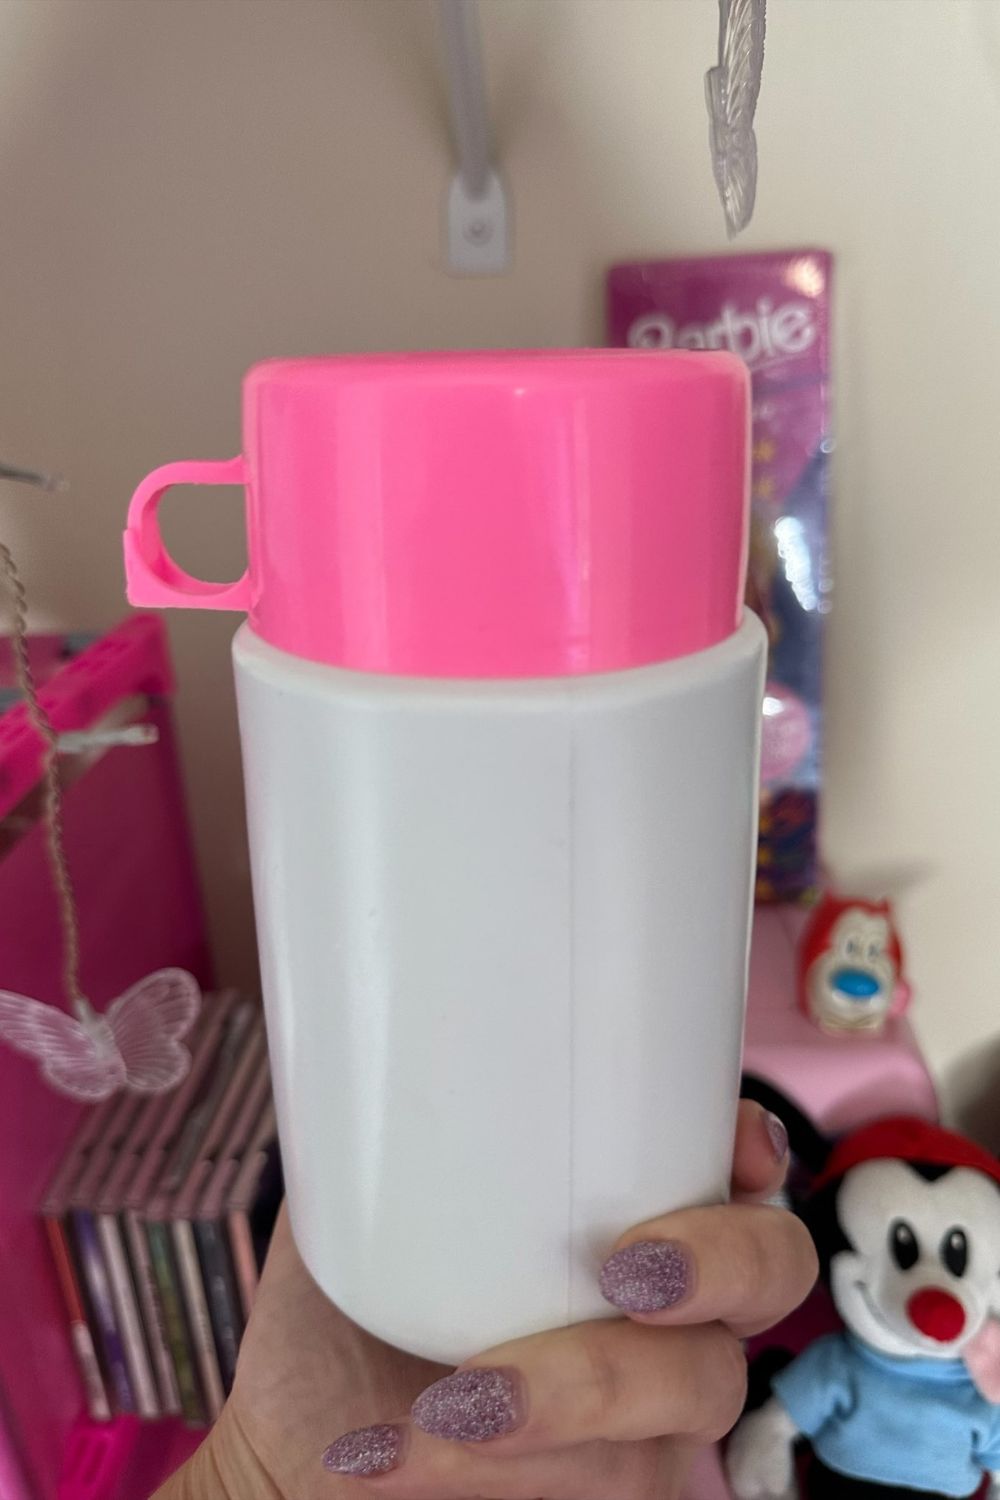 Barbie dated 1962 Red Top Thermos by Mattel - Ruby Lane